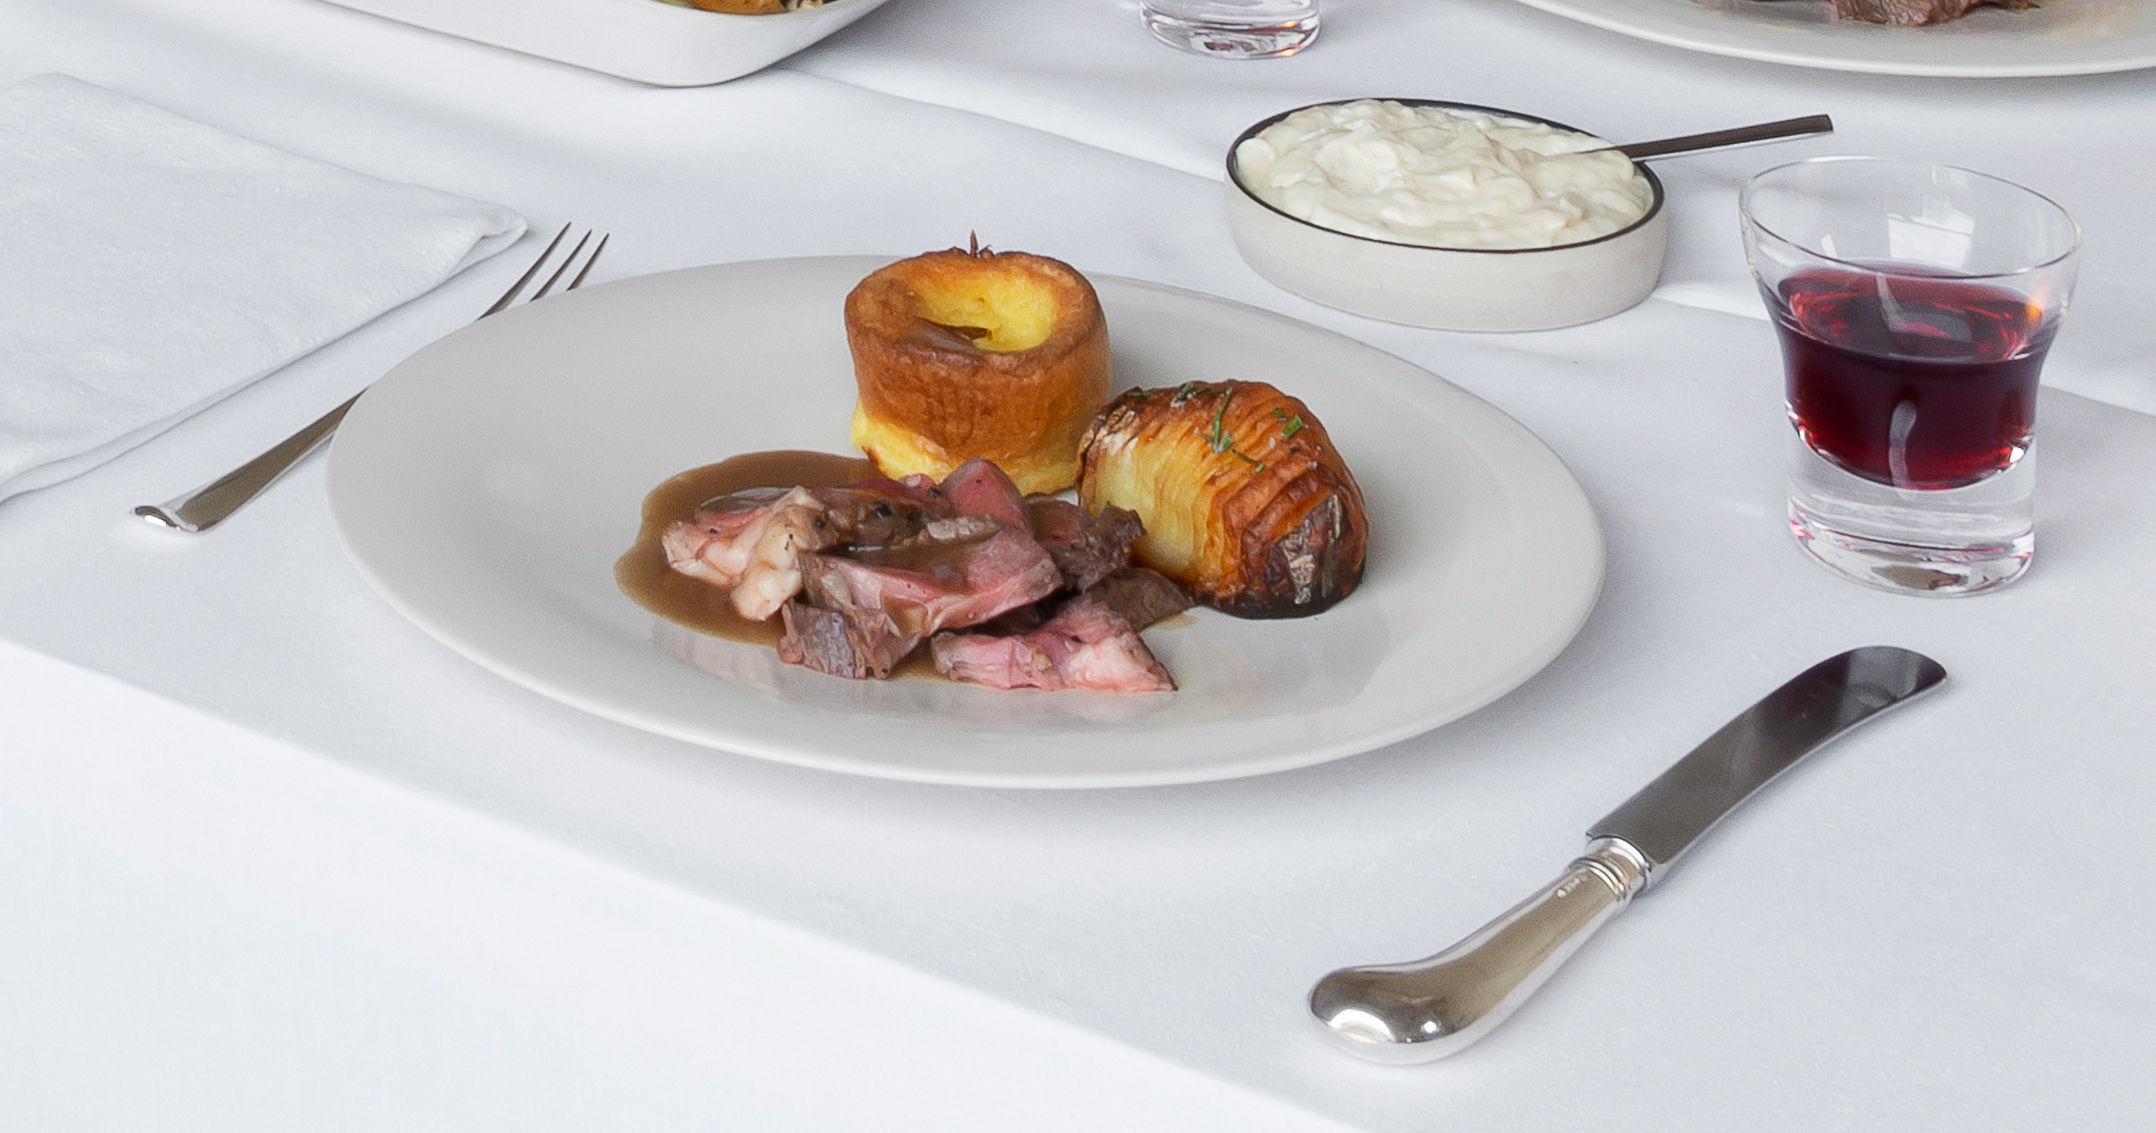 Roast rib of beef with Yorkshire puddings and horseradish sauce. Photography by Gilbert McCarragher 